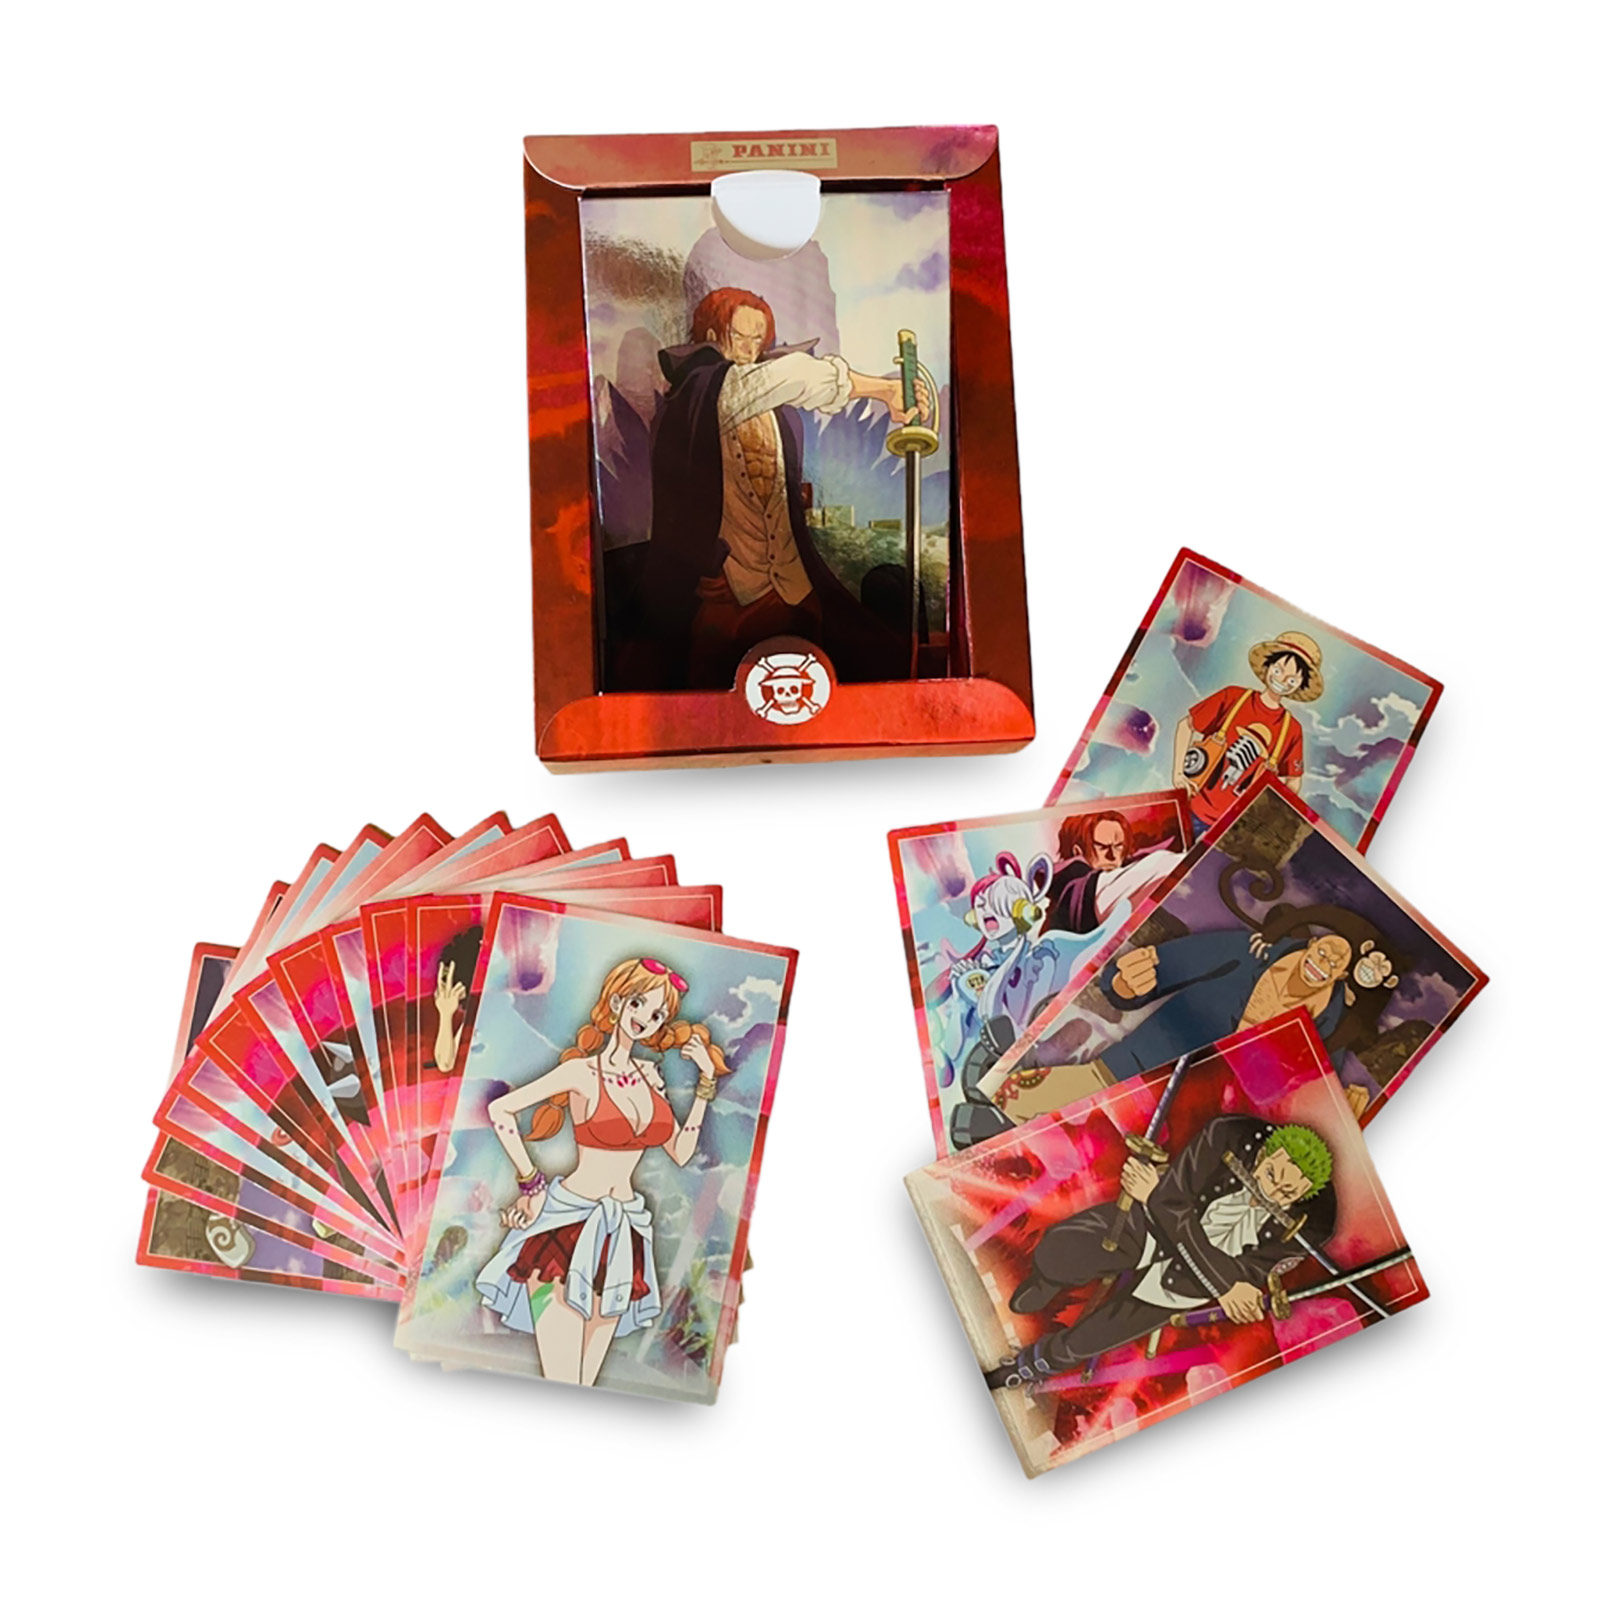 One Piece Red - Trading Card One Shot Box